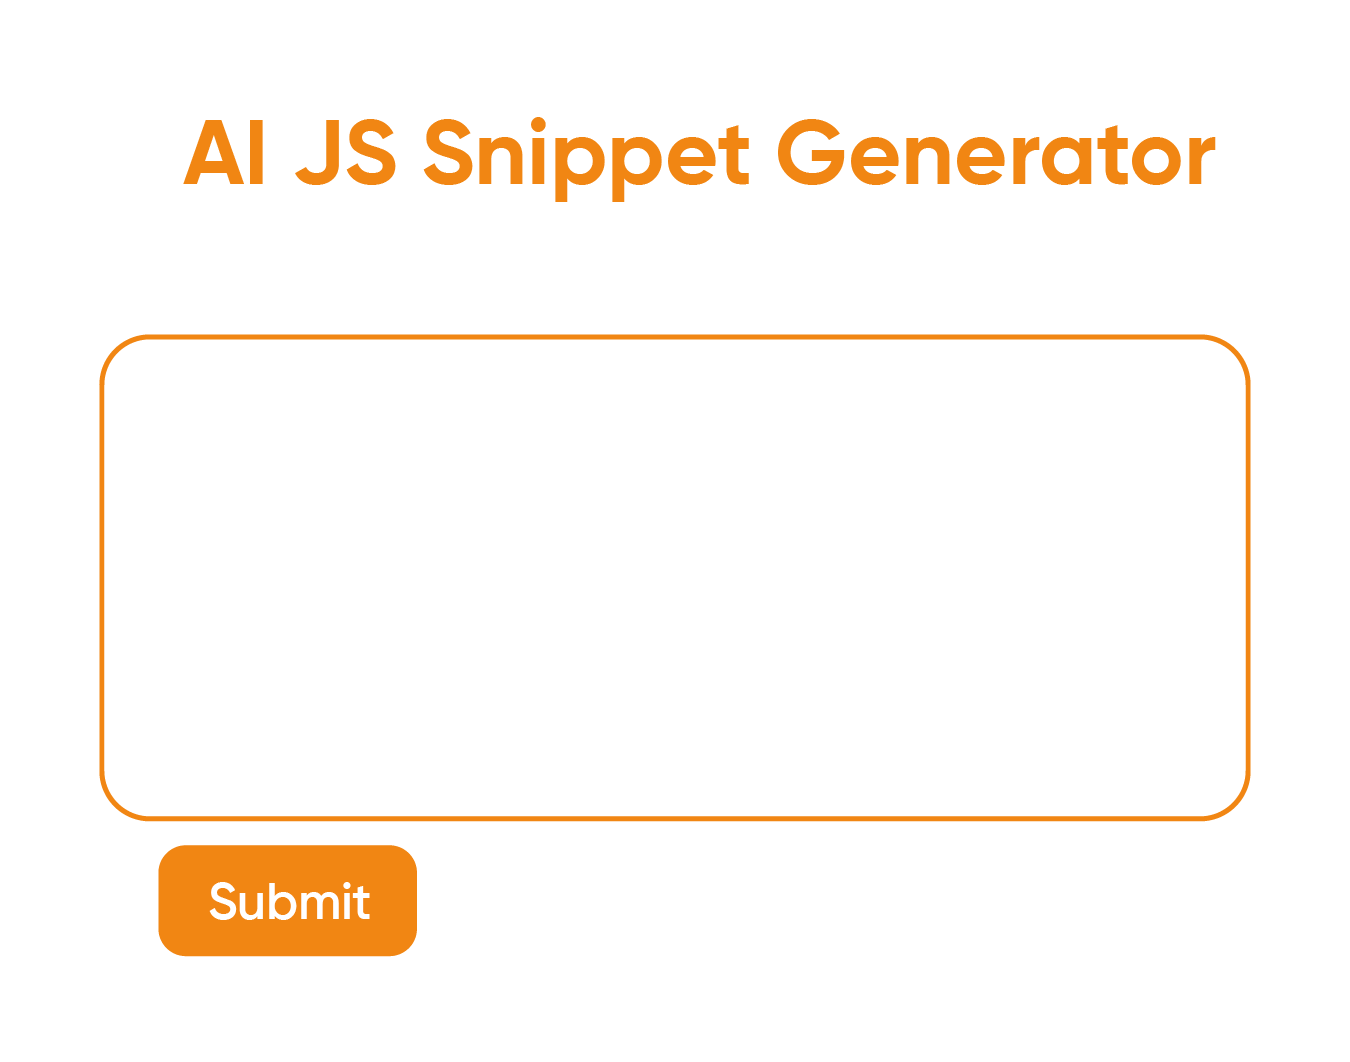 How to use Ettvi's AI JS Snippets